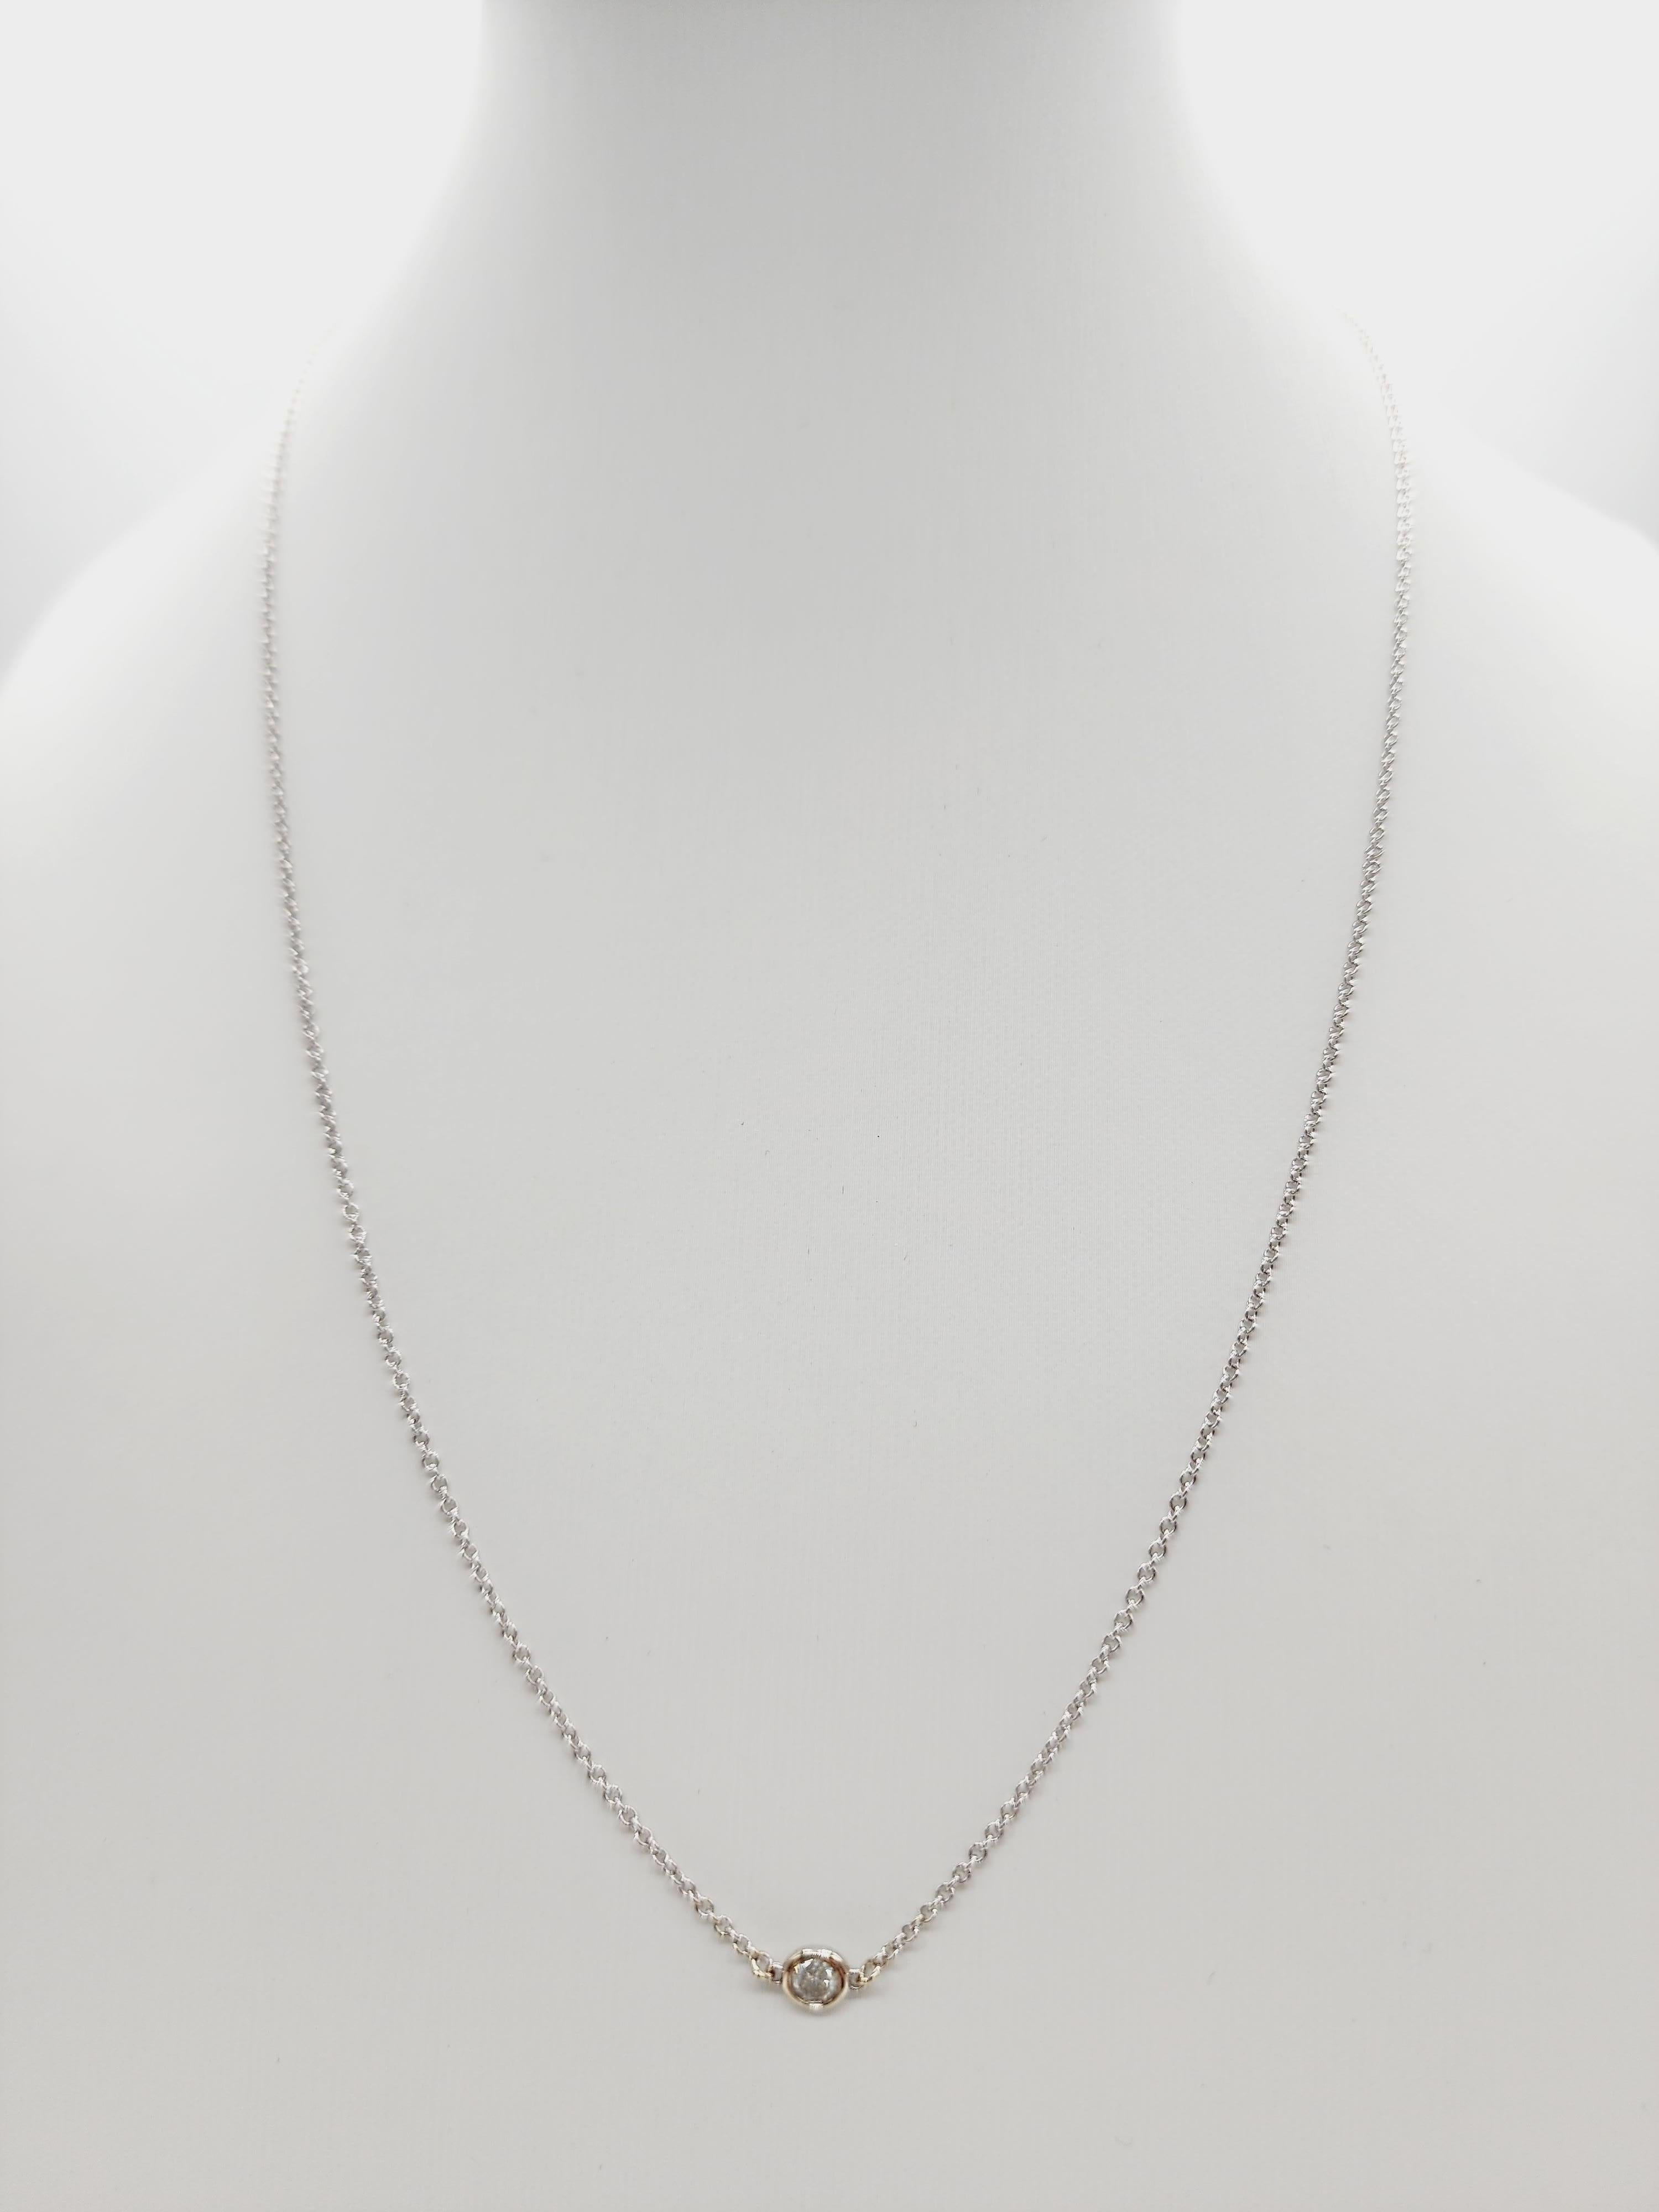 Single Station Diamond by the yard necklace set in Italian made 14K white gold. 
Total weight is 0.13 carats. Beautiful shiny natural diamond. 
Total length is 18 inch. Average Color/Clarity I/I